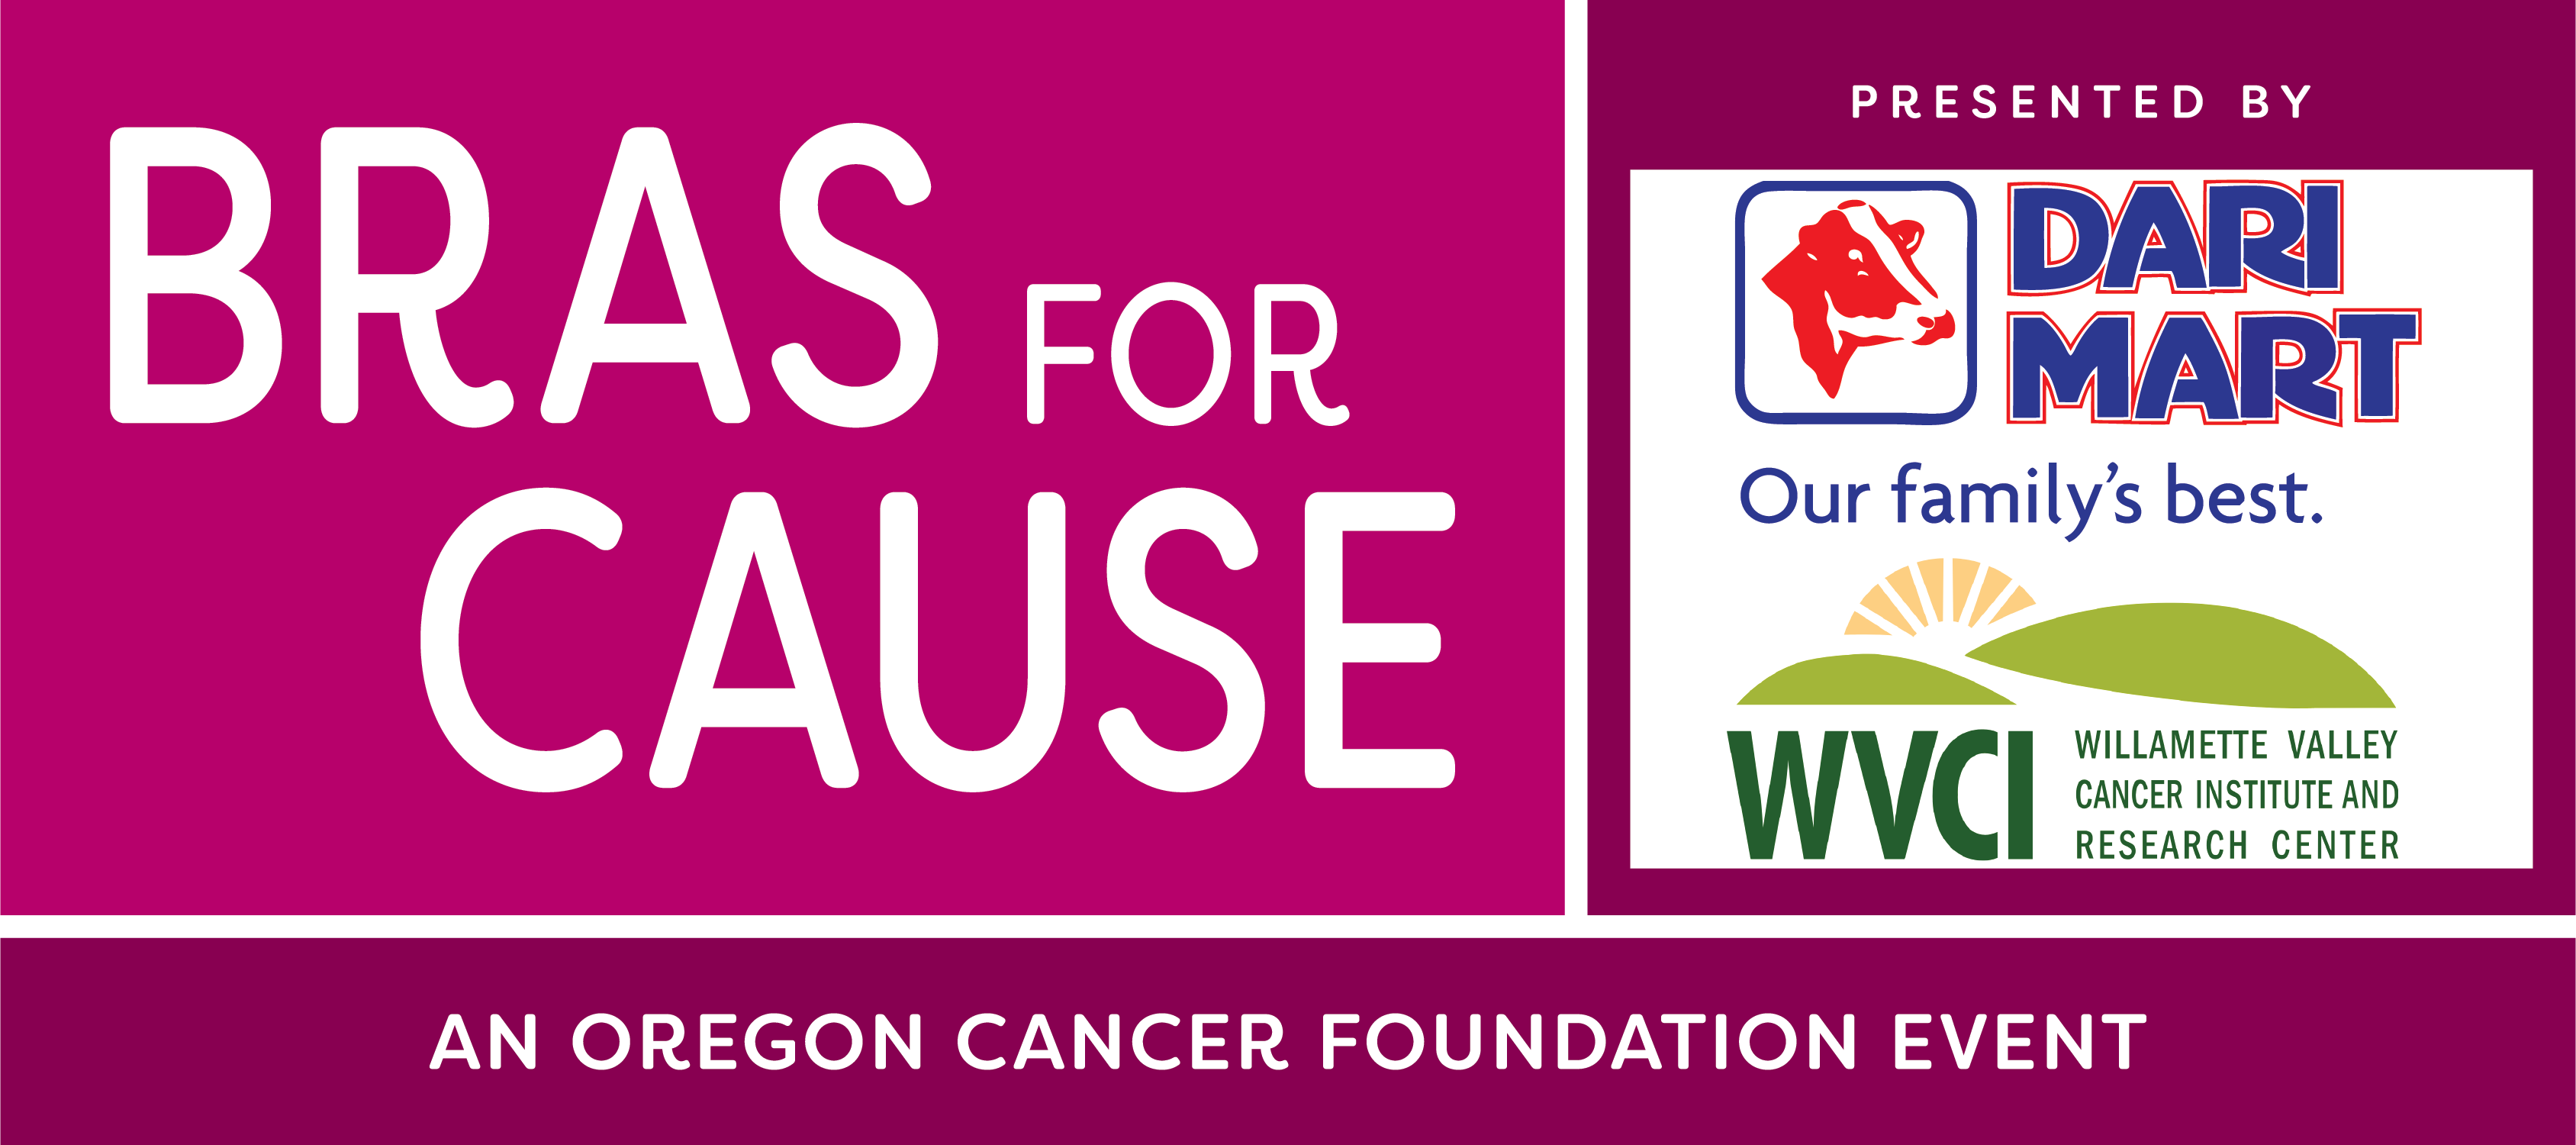 Bras For Cause - An Oregon Cancer Foundation Event